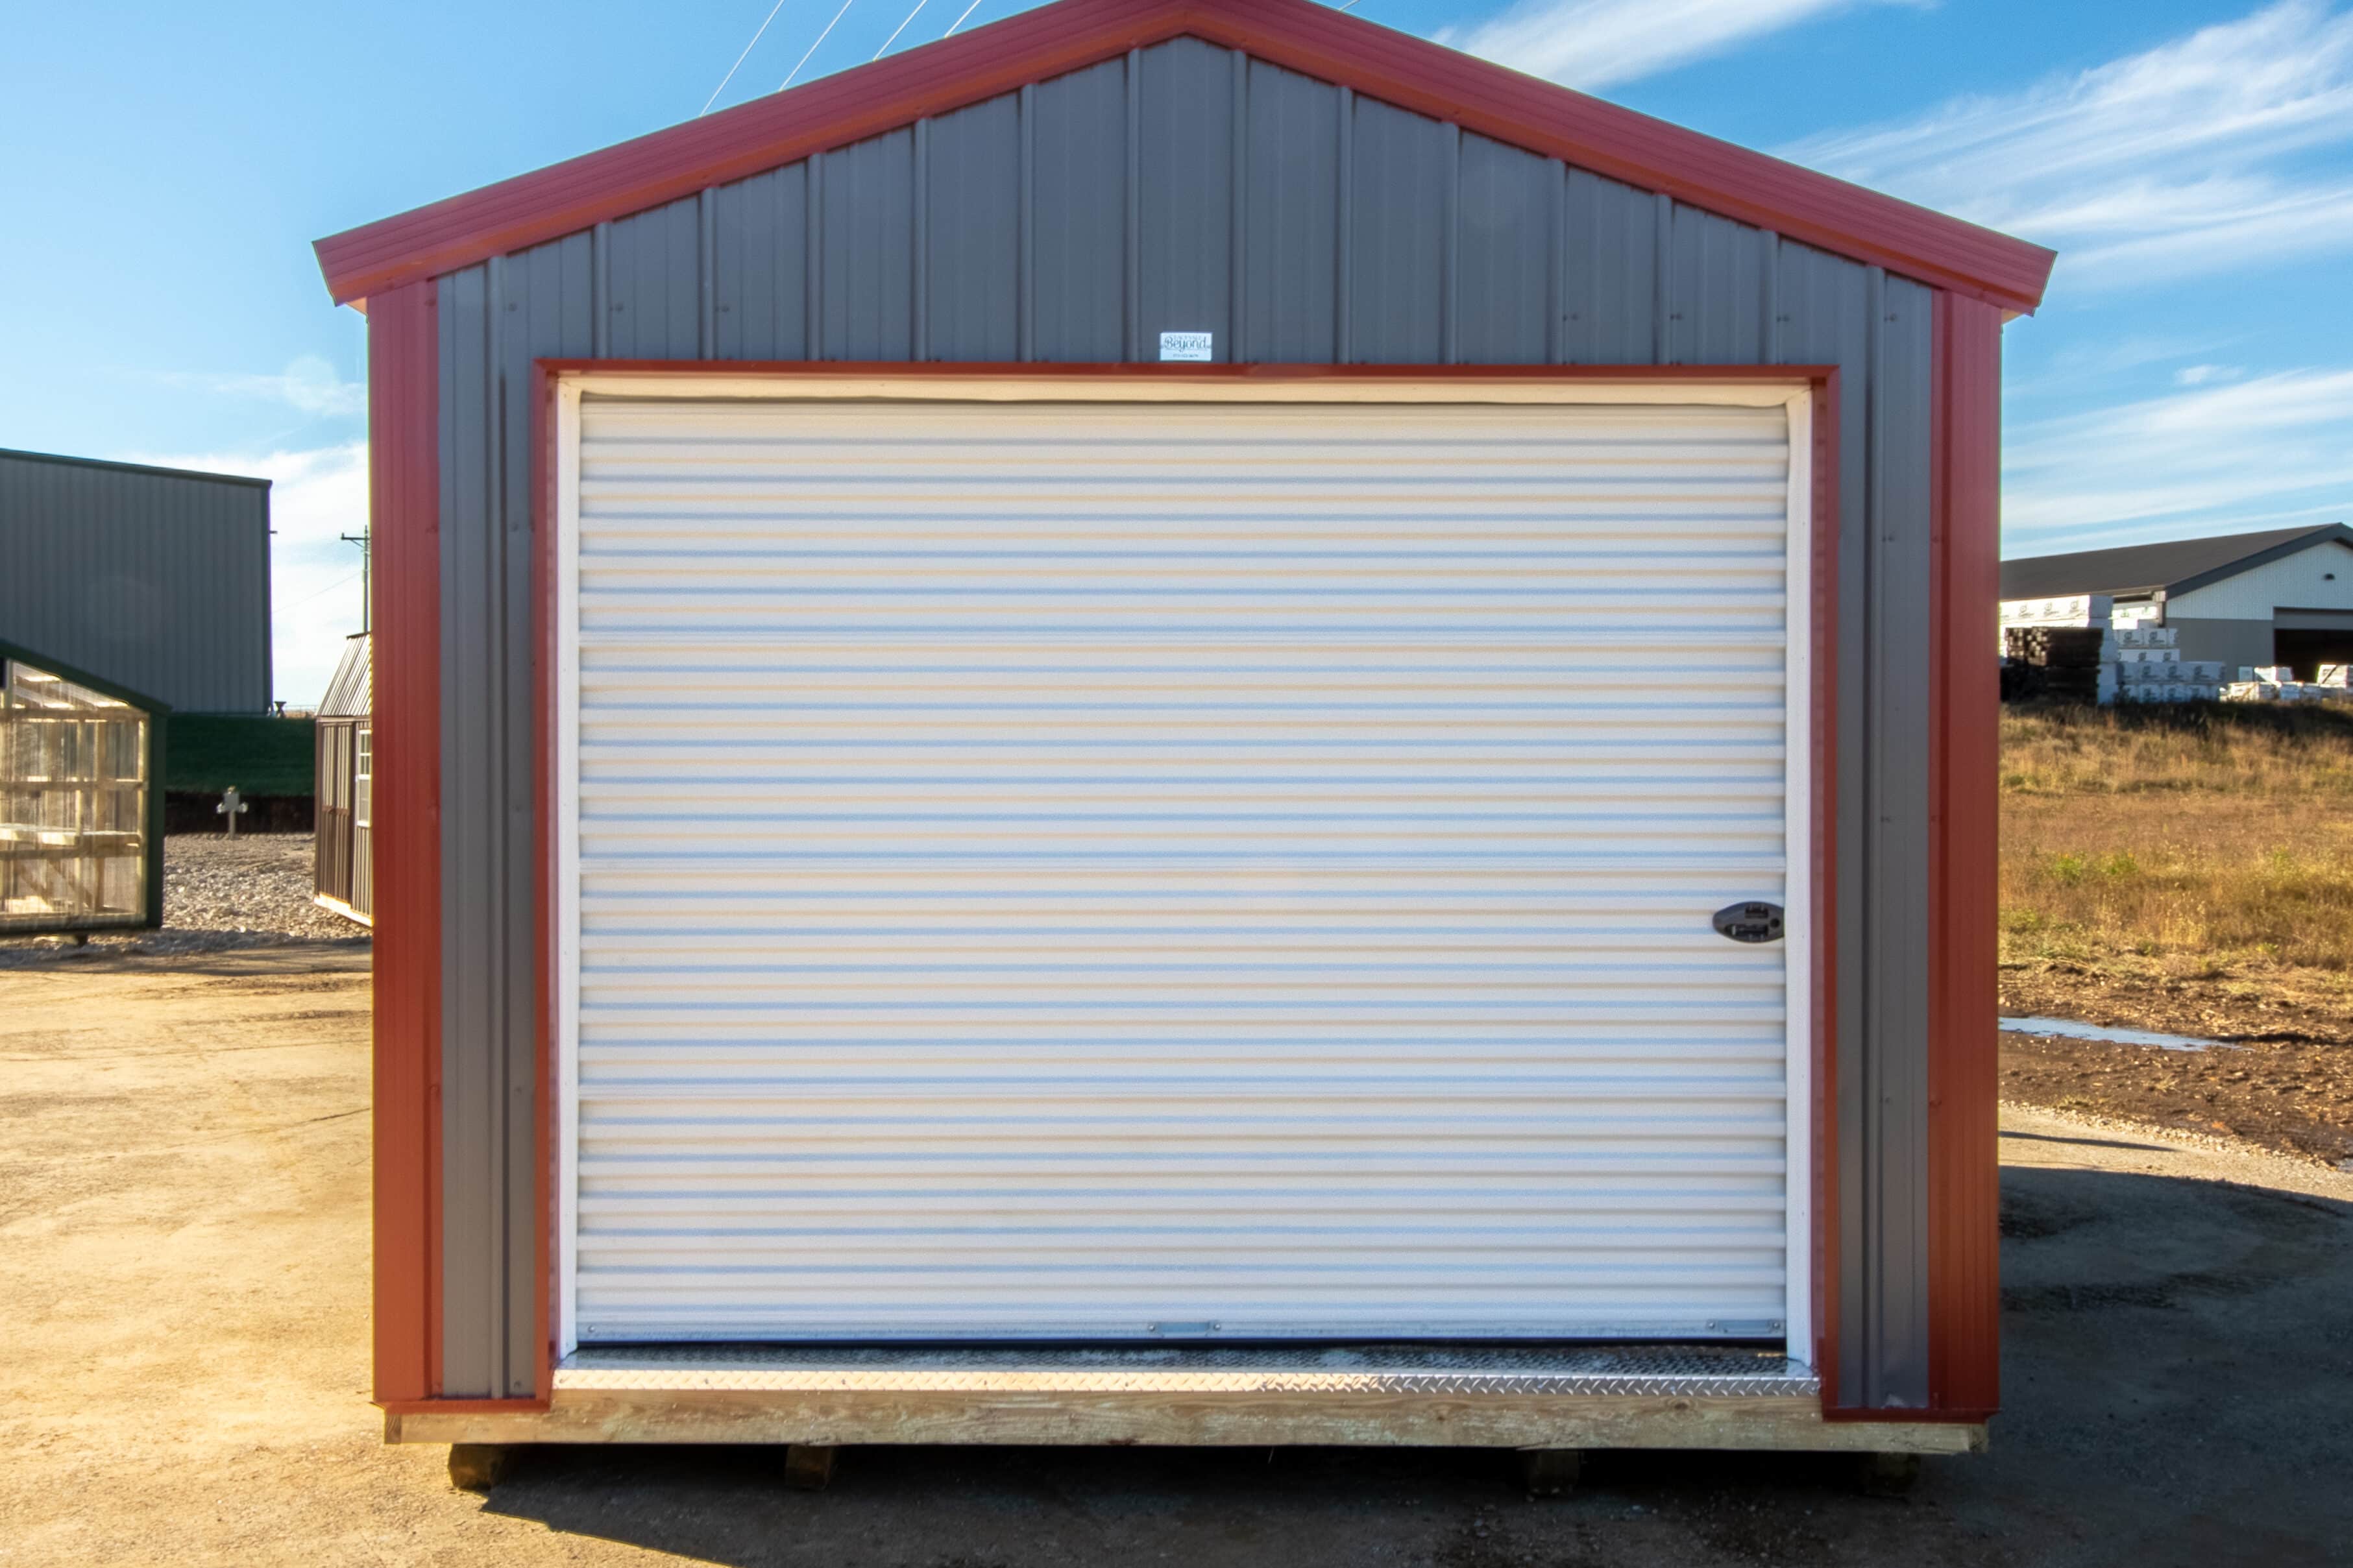 9x7 roll up door for customizable sheds